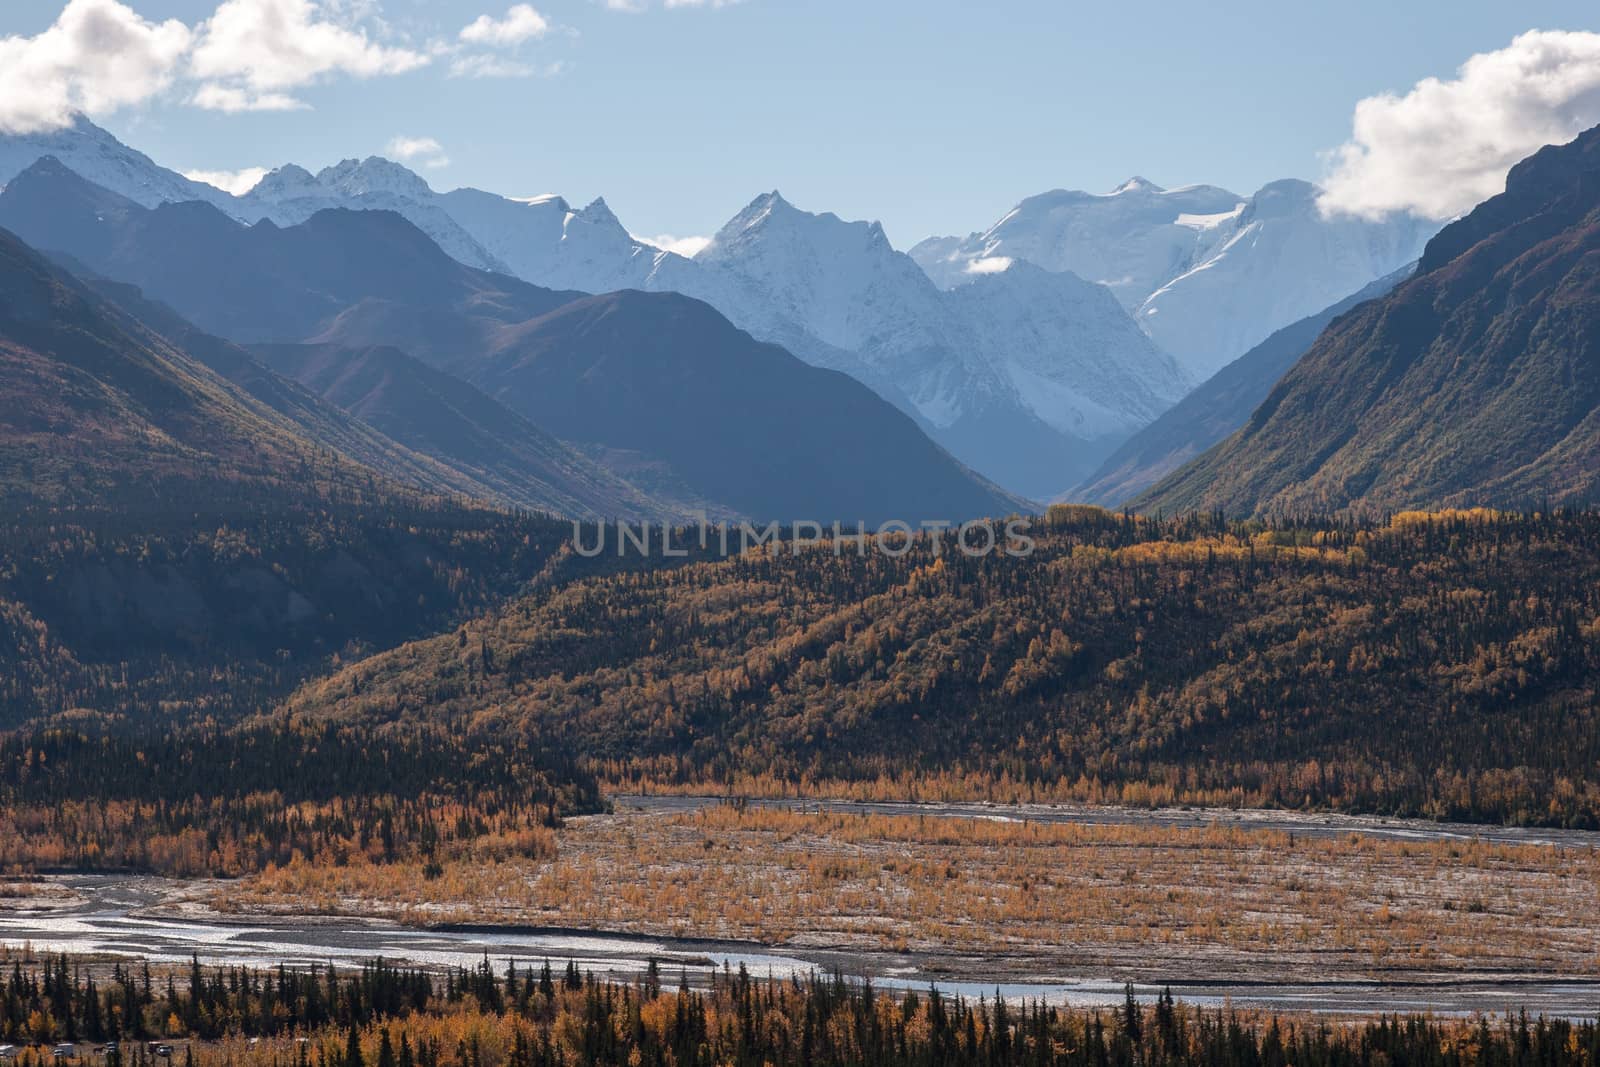 Rugged snow capped peaks rise above autumn lowlands